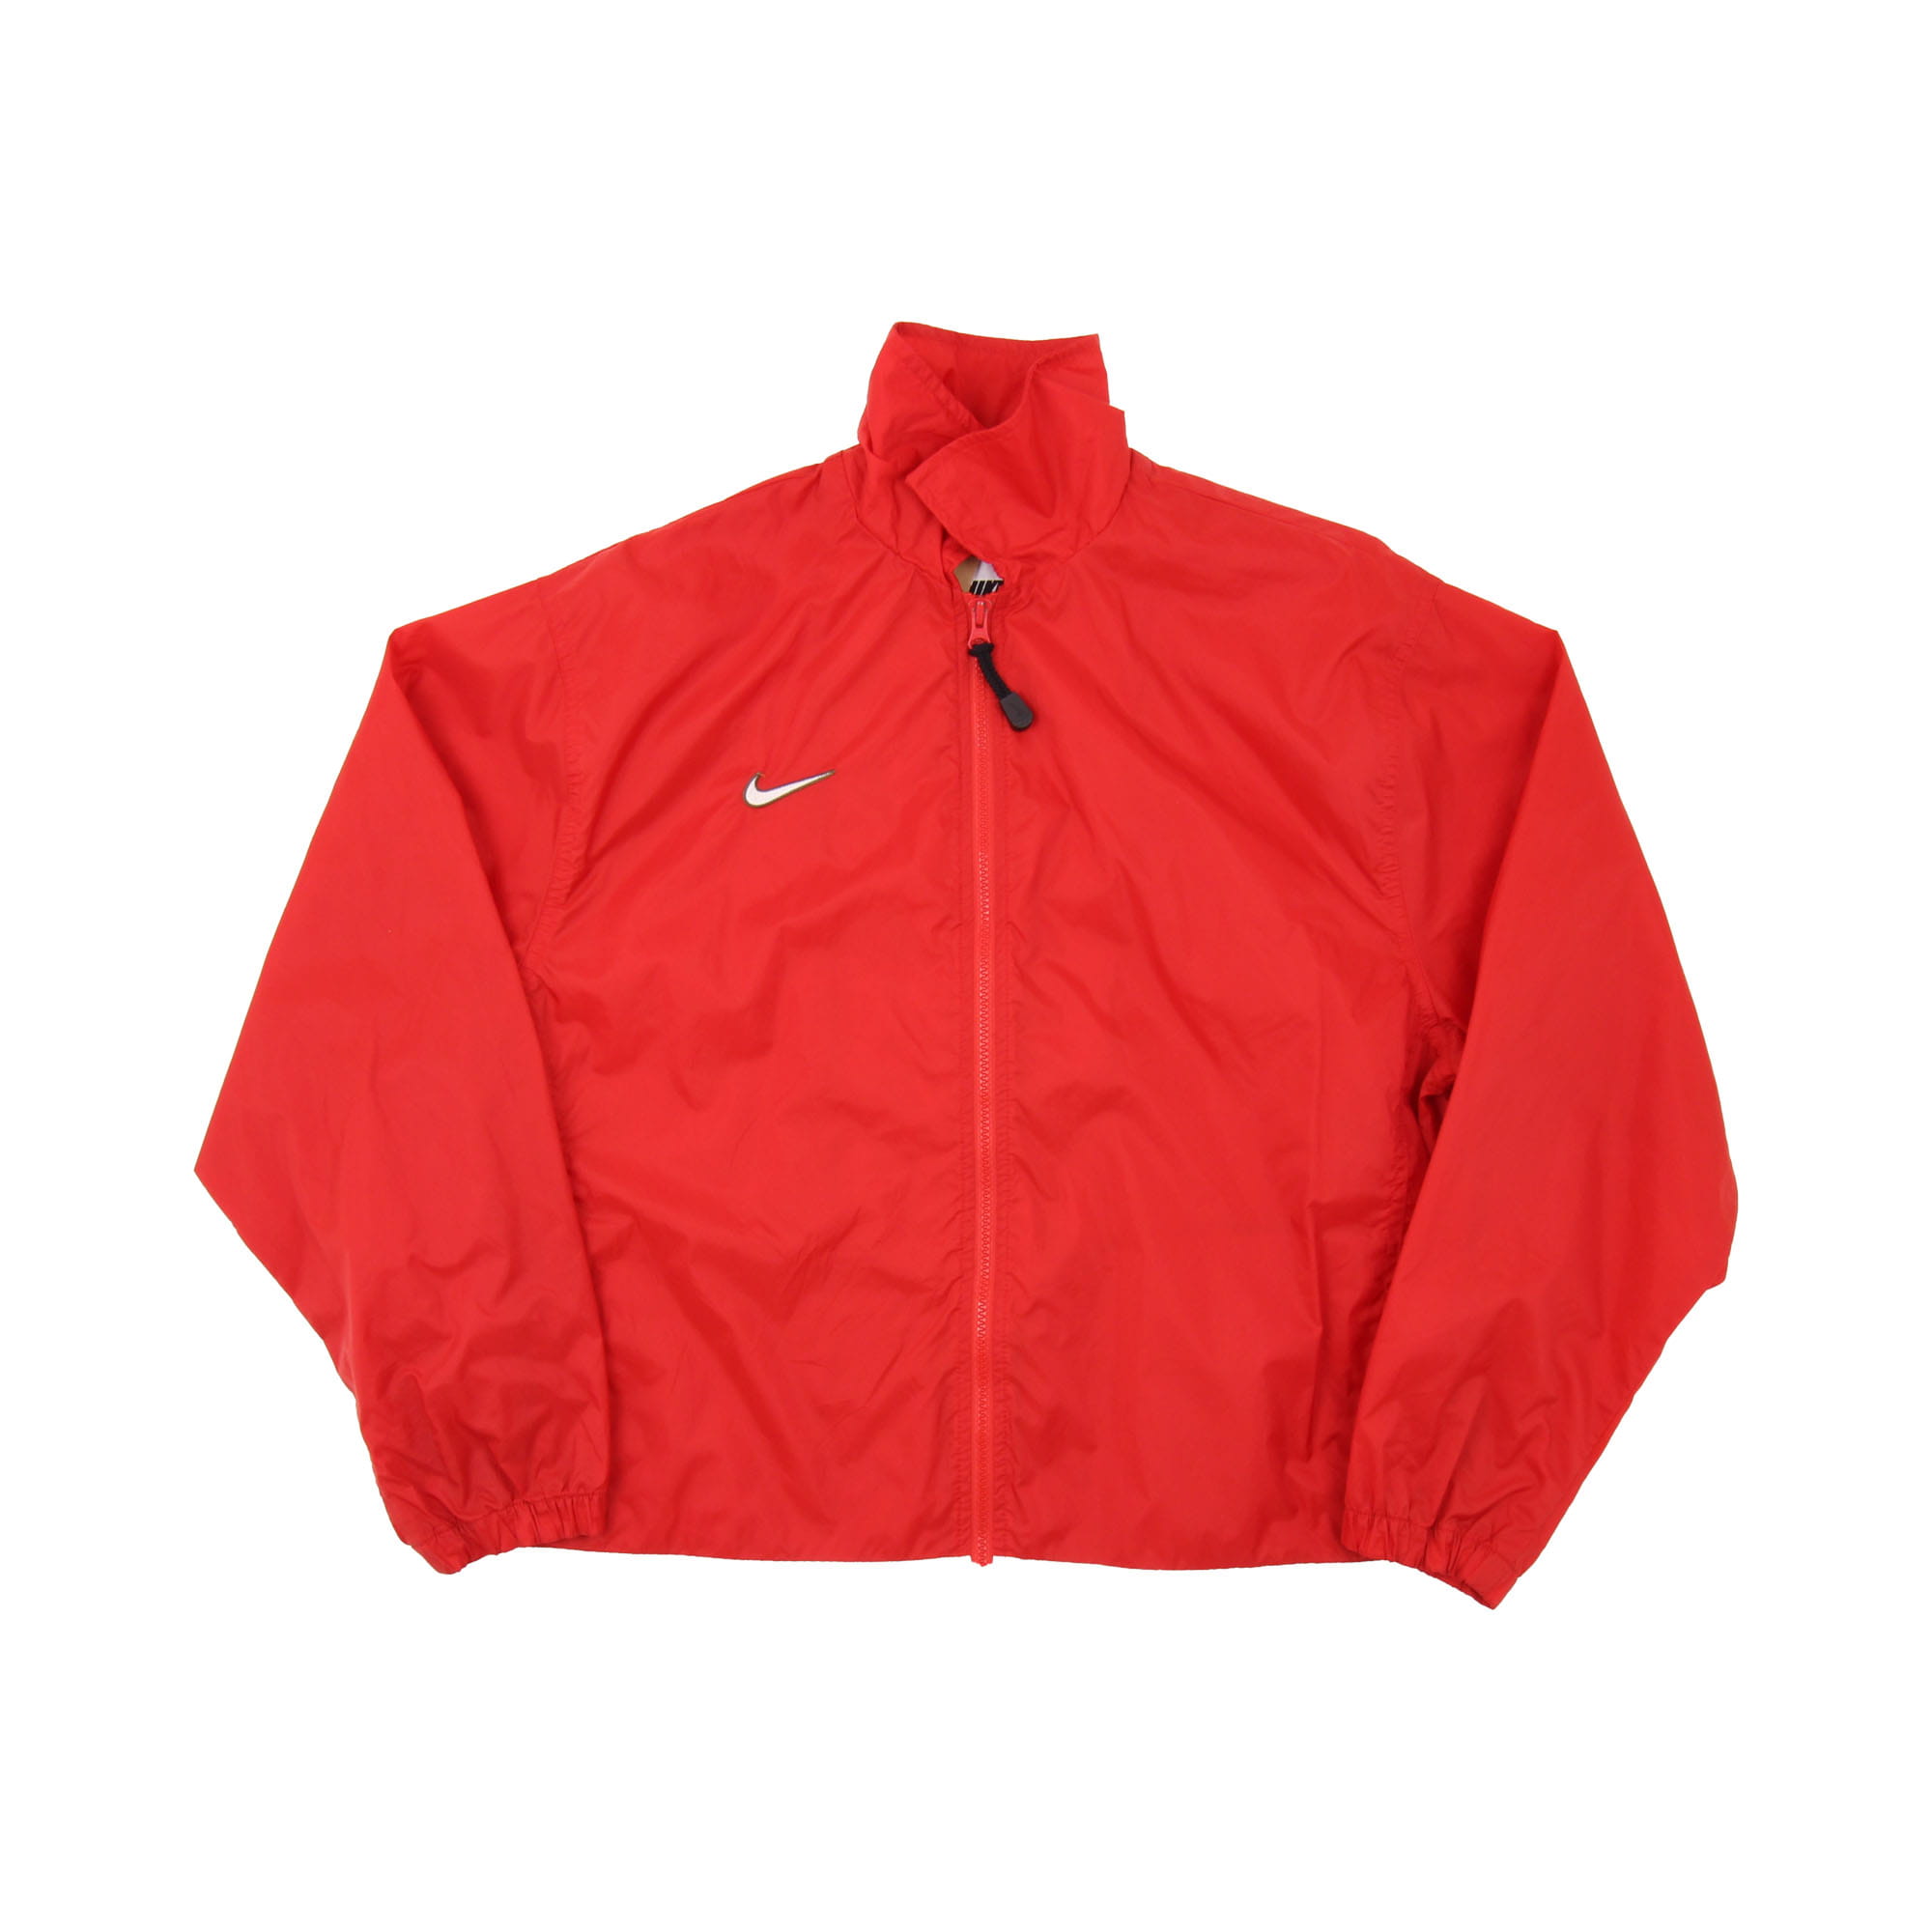 Nike Thin Jacket Red -  L